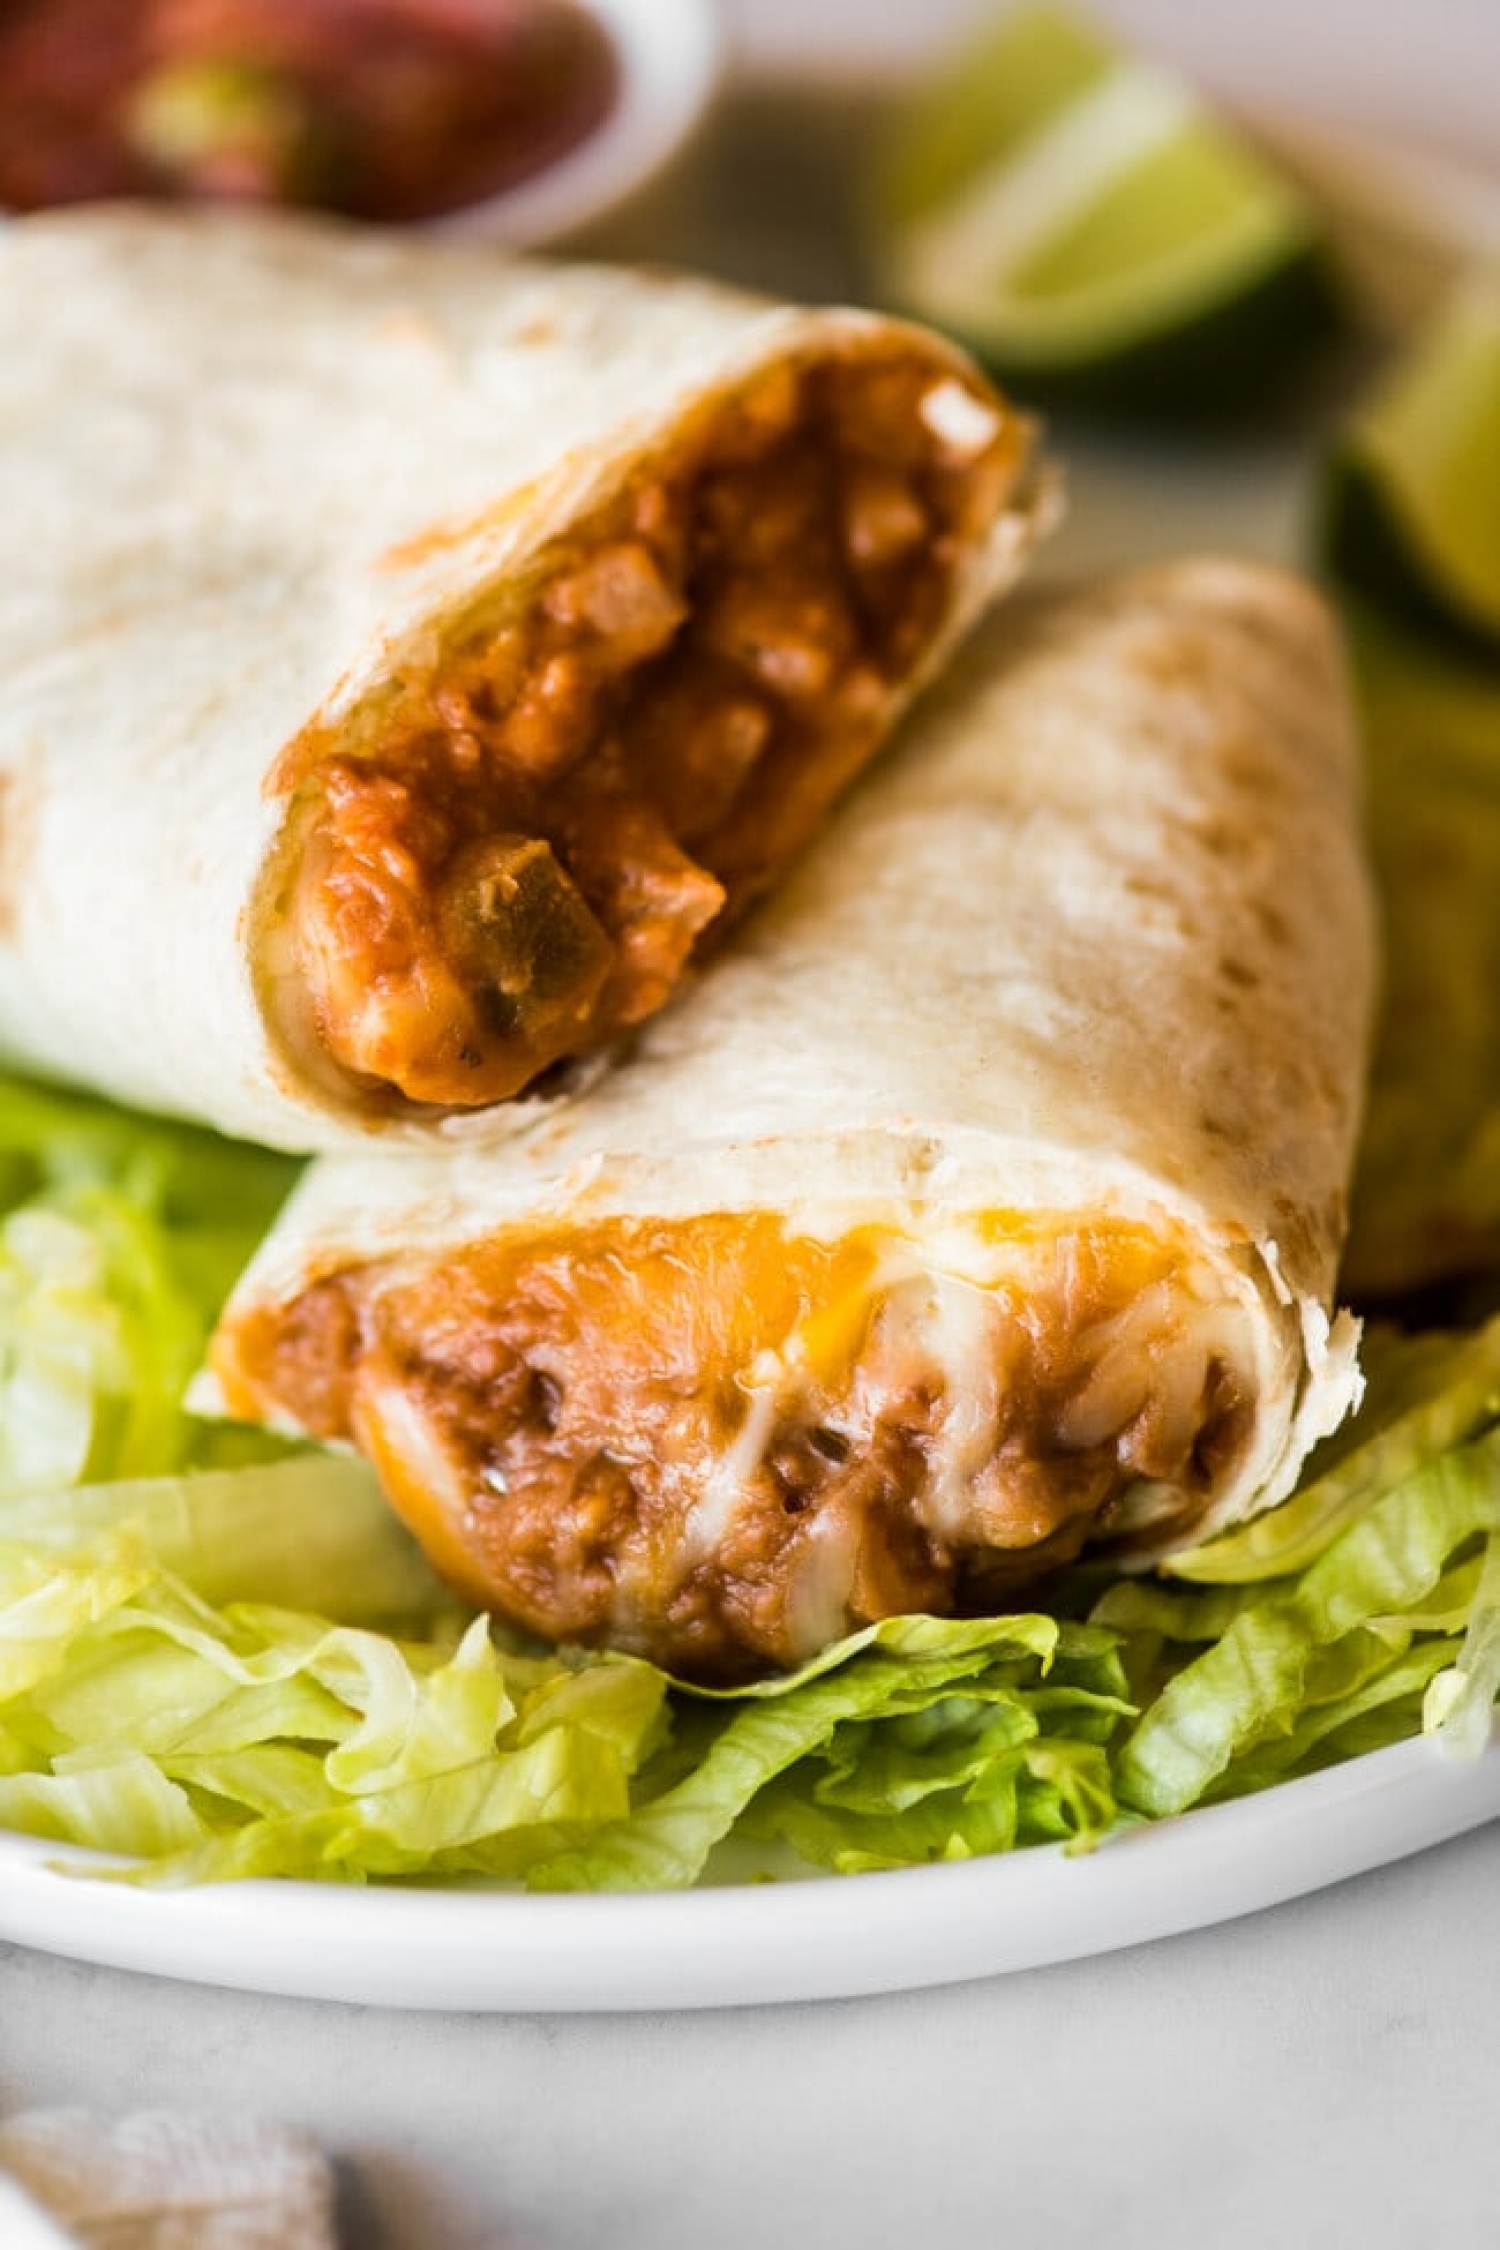 <p>Nothing beats the simplicity and tastiness of bean and cheese burritos, and there's no need to head to the nearest drive-thru to satisfy your cravings. <a href="https://www.isabeleats.com/bean-and-cheese-burritos/" rel="noopener">This recipe</a> comes together in less than 30 minutes, thanks to canned refried beans and a bunch of other pantry staples that cook up in your oven to cheesy perfection.</p>